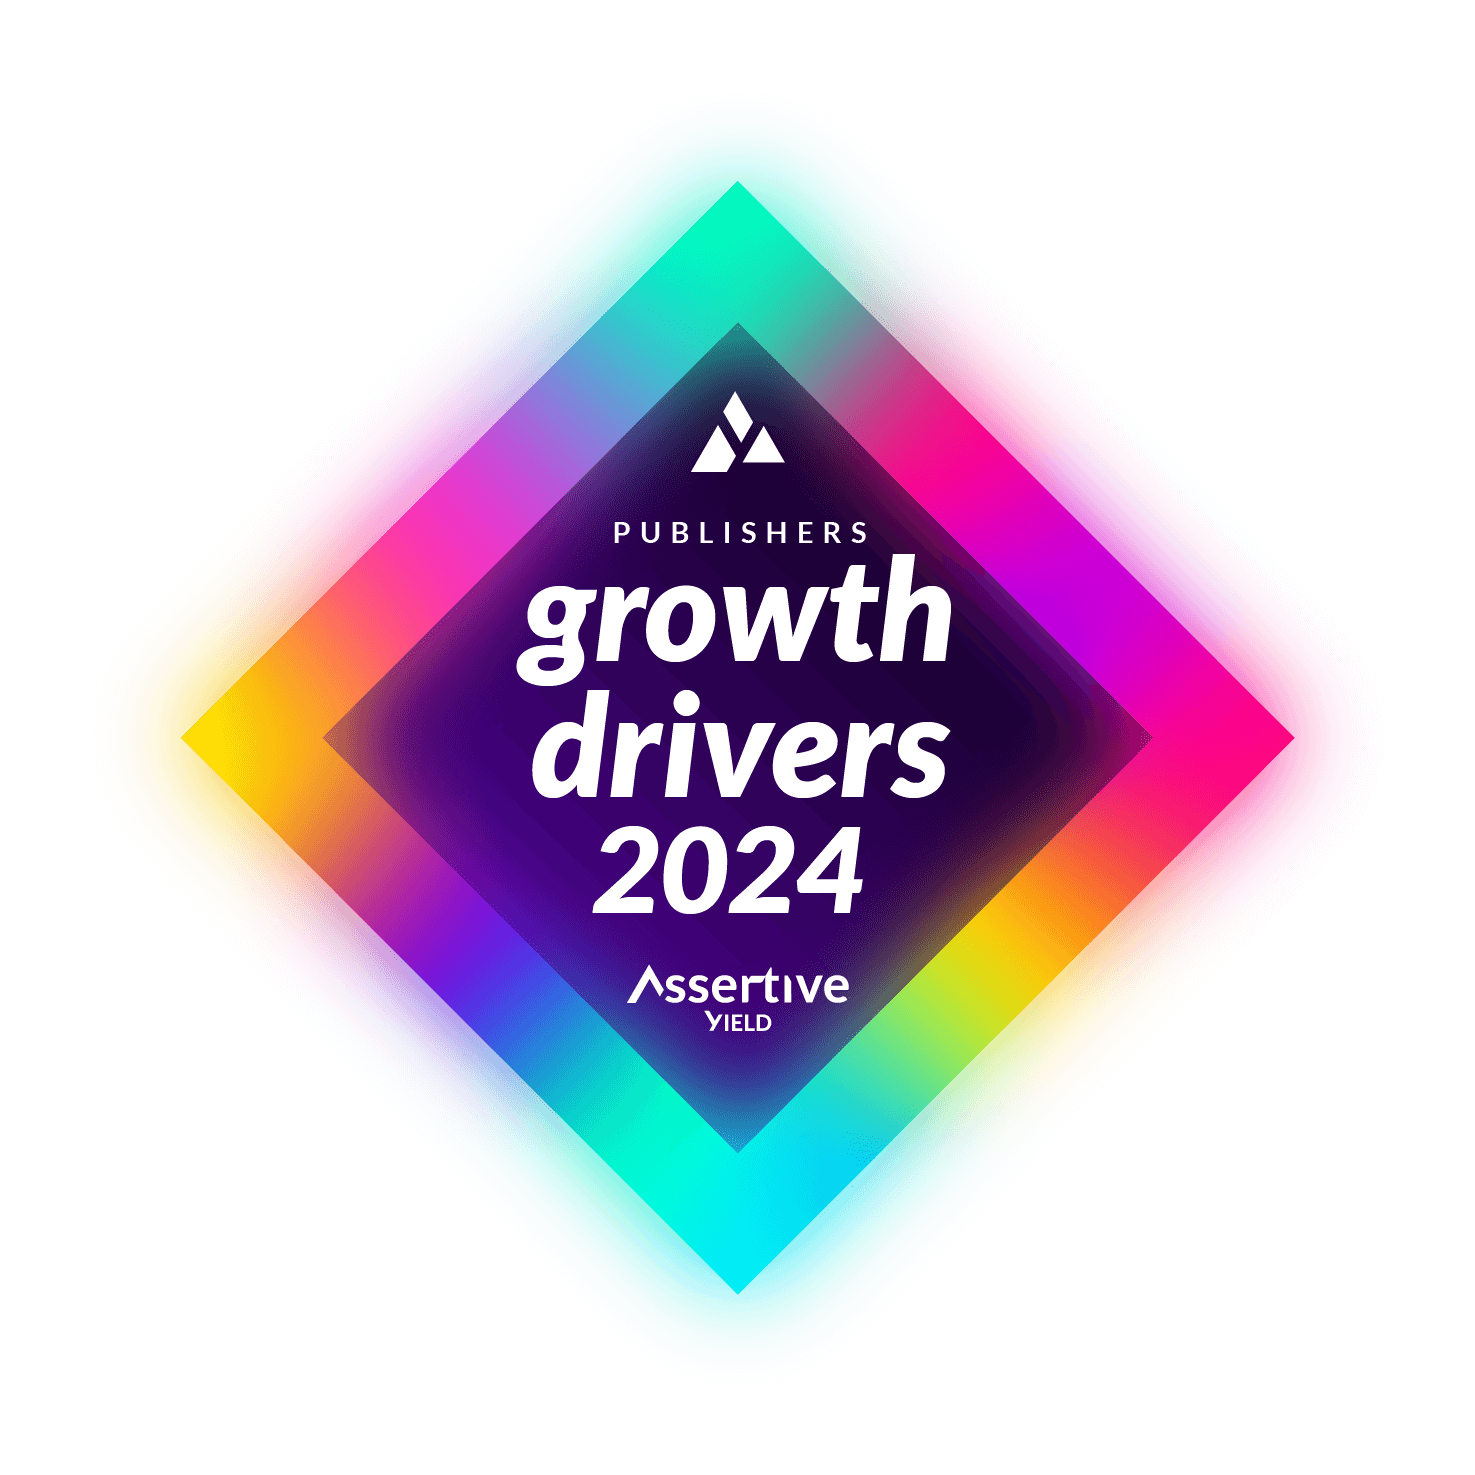 Publishers Growth Drivers 2024